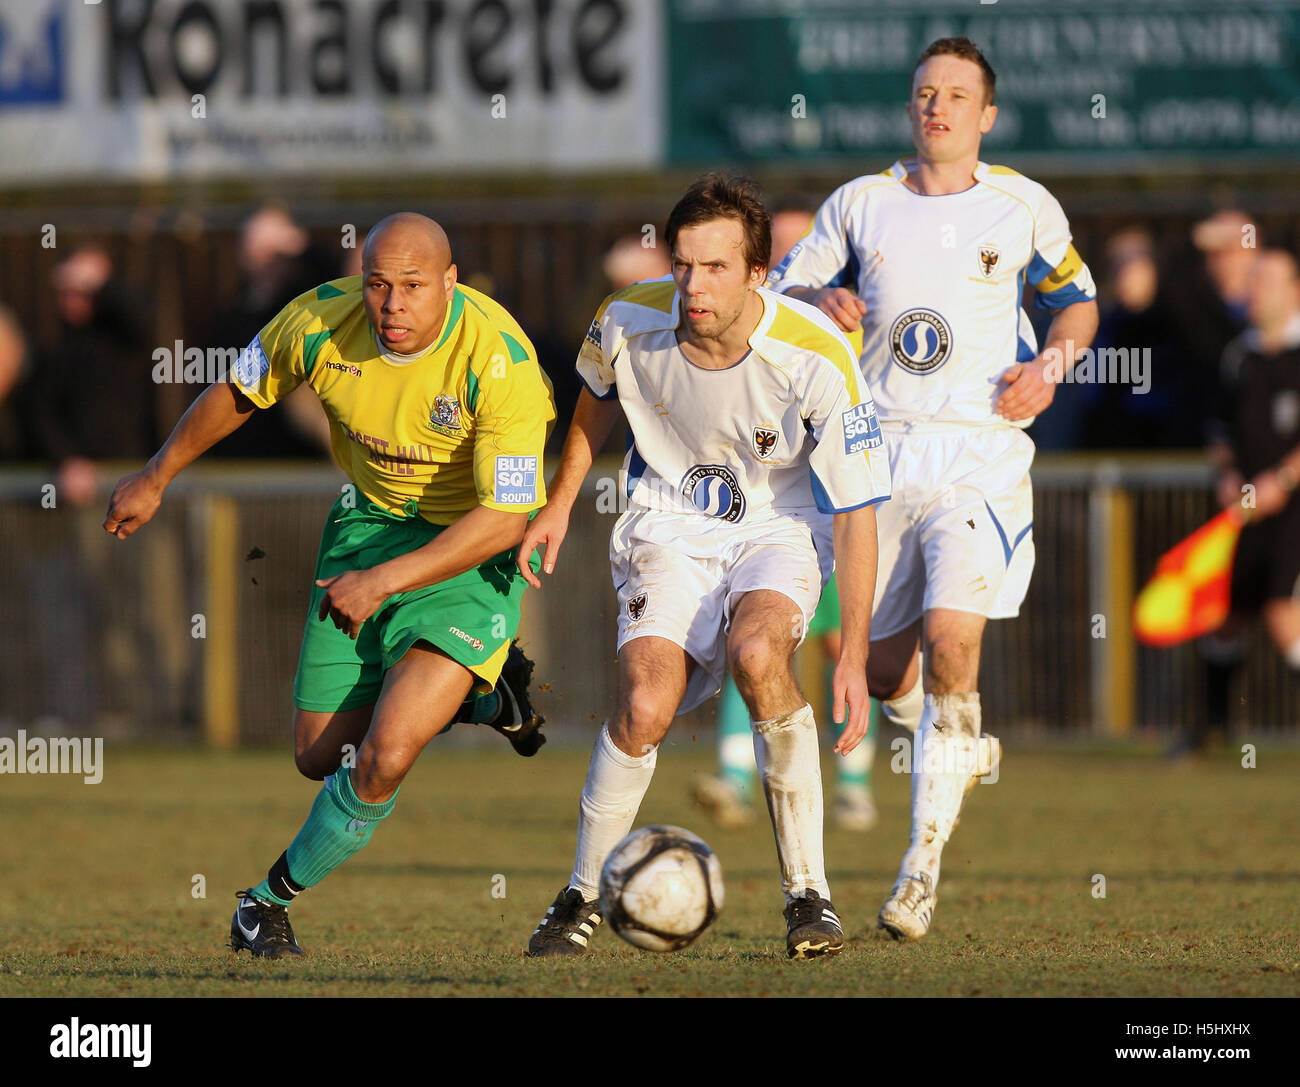 Che Stadhart in action for Thurrock - Thurrock vs AFC Wimbledon - Blue Square Conference South at Ship Lane, Purfleet, Essex - 21/02/09. Stock Photo